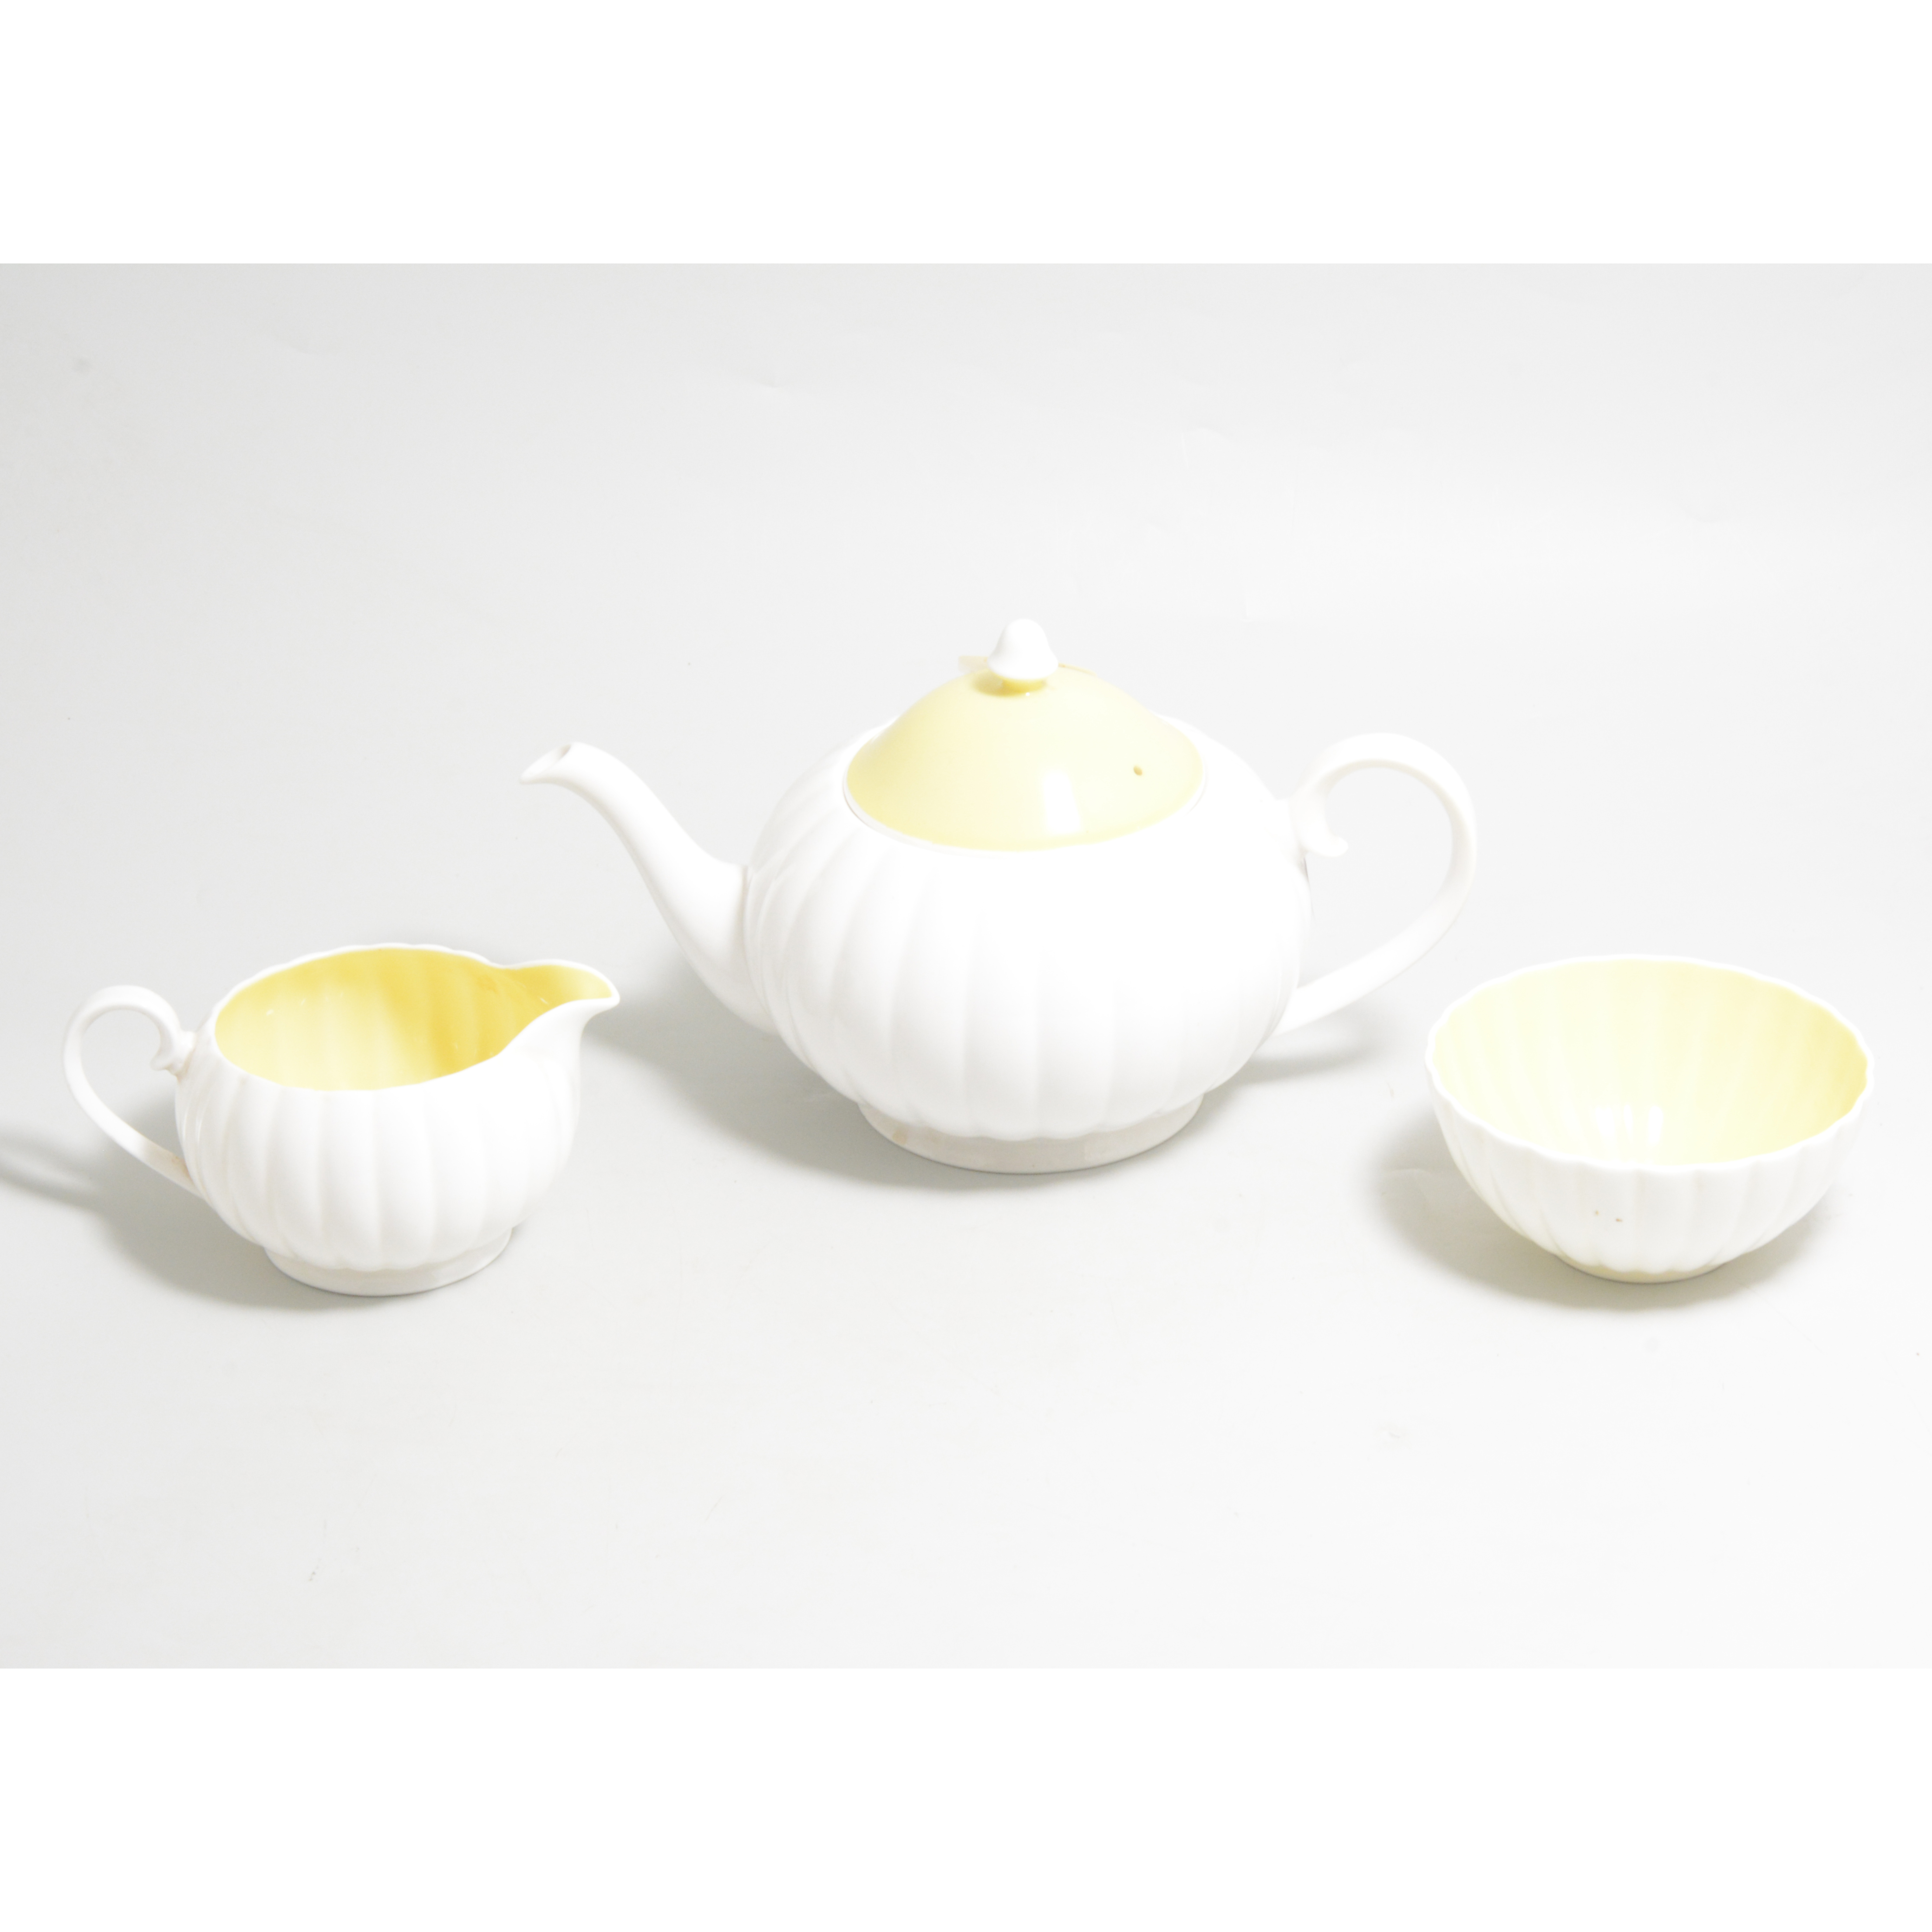 A Susie Cooper three piece teaset, white flute design with yellow interior and cover to teapot.